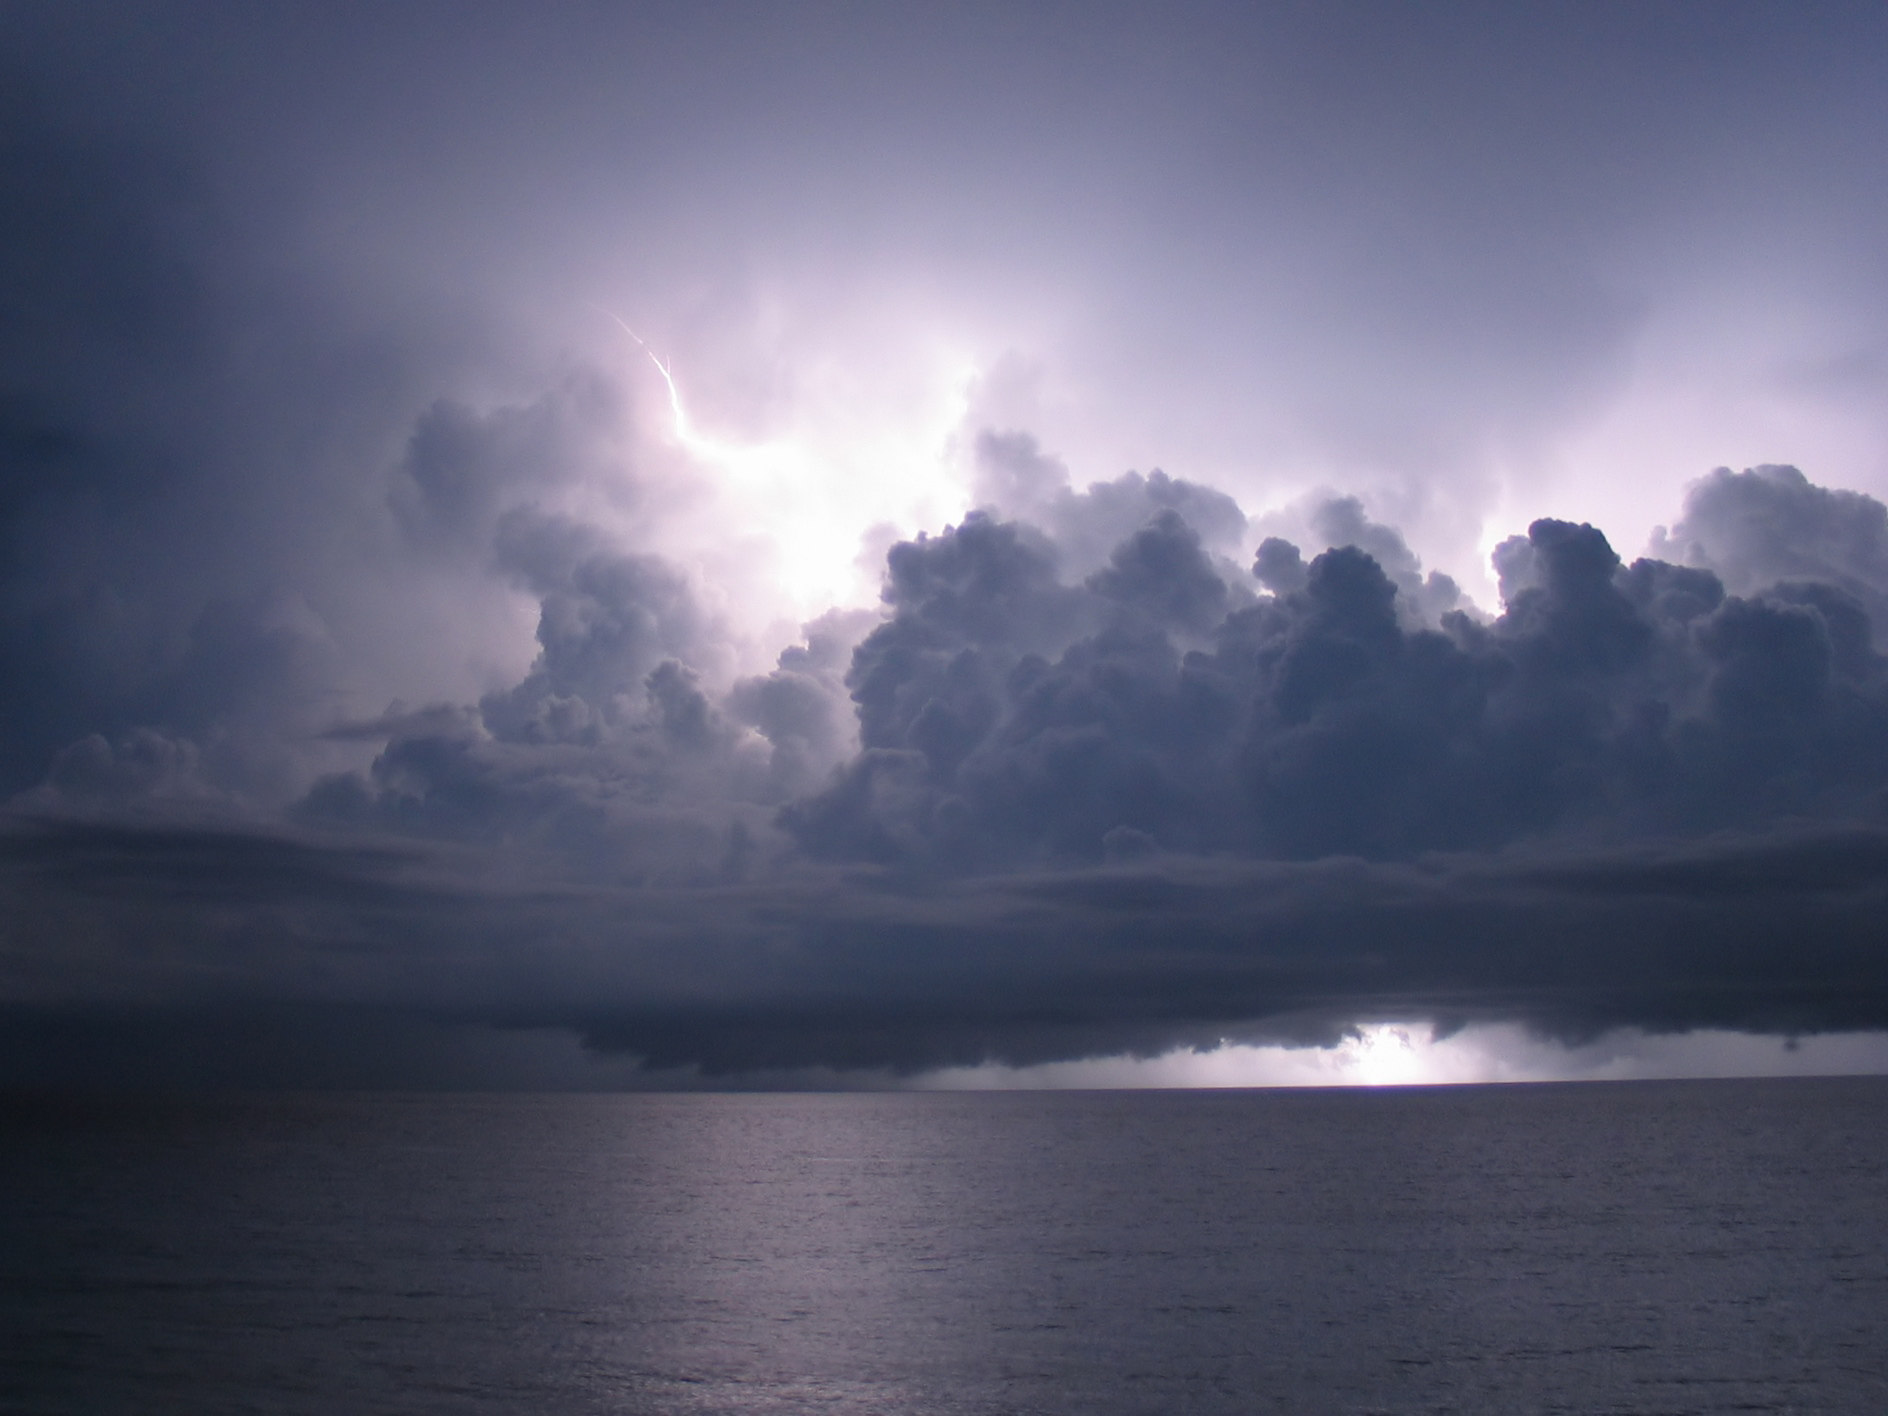 Dark thunderclouds are lit from within by lightning over a flat grey ocean.